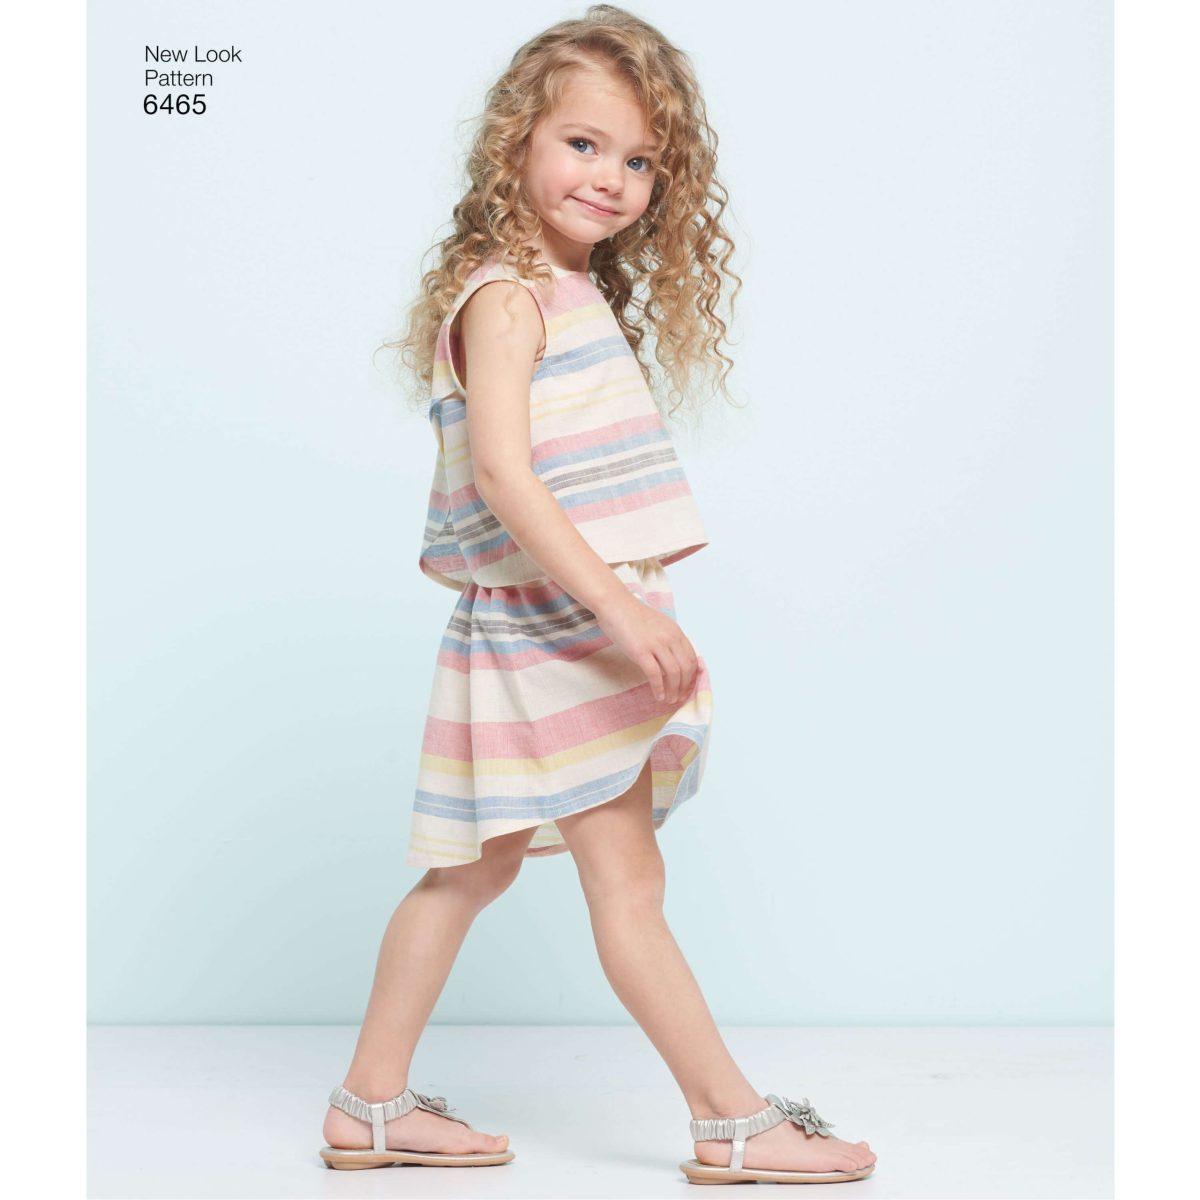 New Look Sewing Pattern N6465 Child's Easy Top, Skirt and Shorts